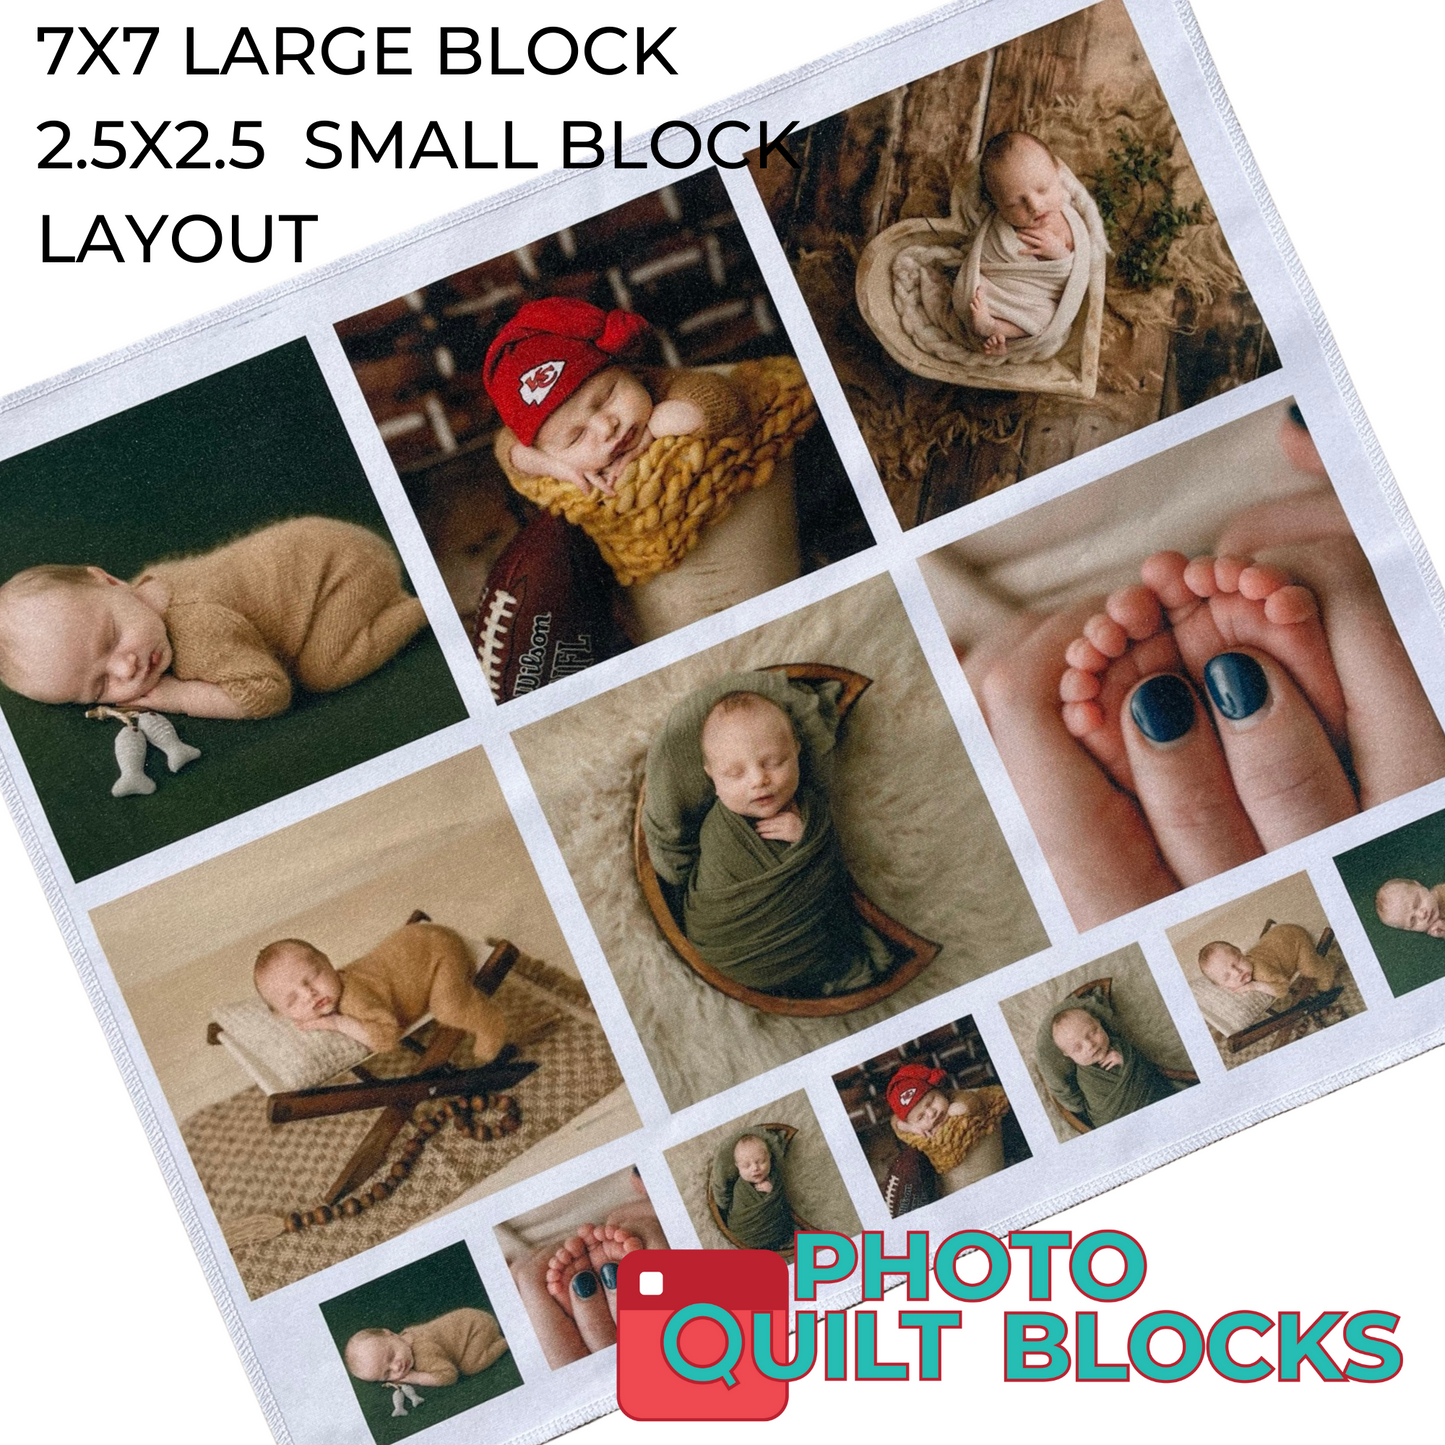 7 x 7 Fat Quarter Fabric Layouts | Quilts and Quilts